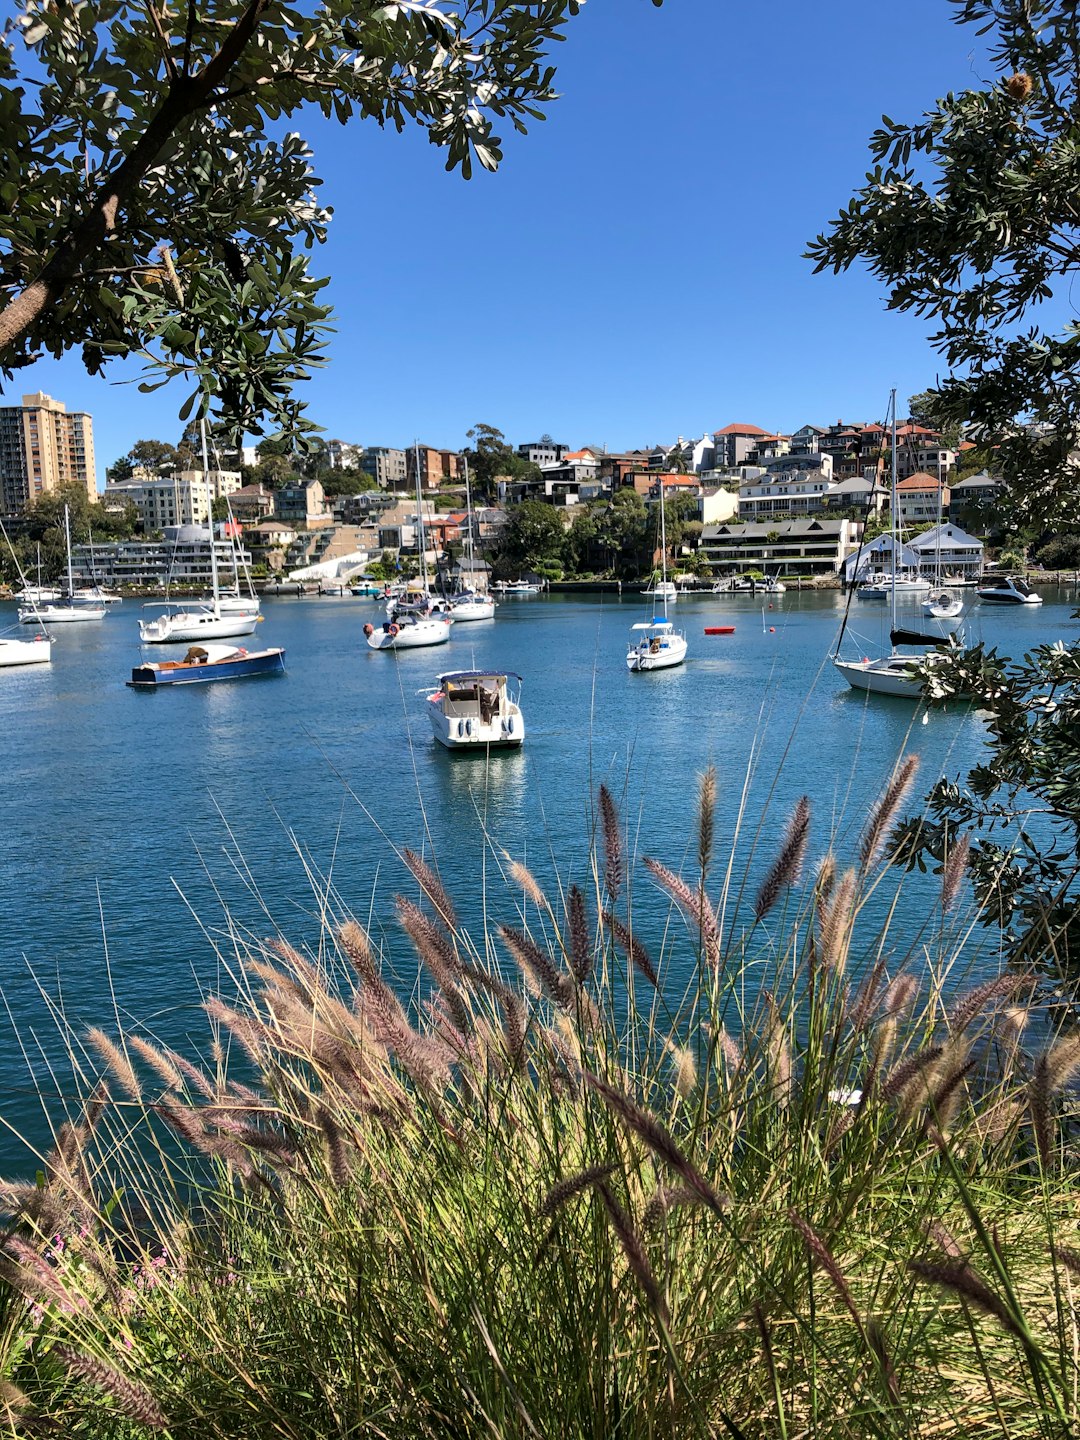 Bay photo spot 1 Harbourview Crescent Cremorne Point NSW 2090